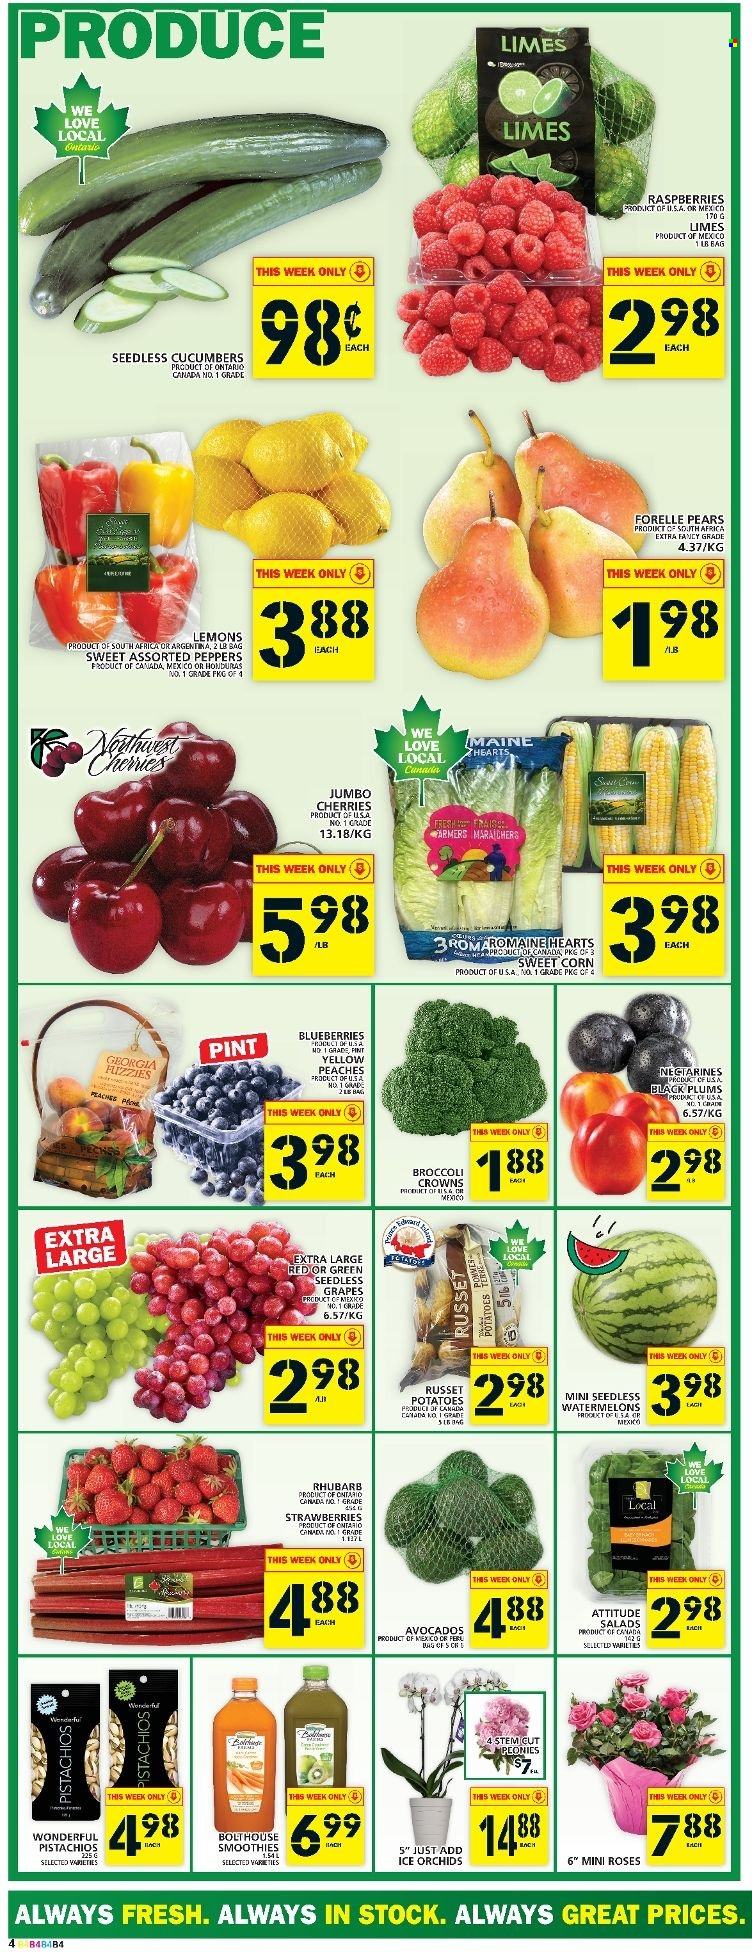 thumbnail - Food Basics Flyer - June 30, 2022 - July 06, 2022 - Sales products - corn, cucumber, rhubarb, russet potatoes, potatoes, peppers, sweet corn, avocado, blueberries, grapes, limes, nectarines, seedless grapes, strawberries, plums, cherries, pears, lemons, black plums, peaches, pistachios, smoothie, rose. Page 5.